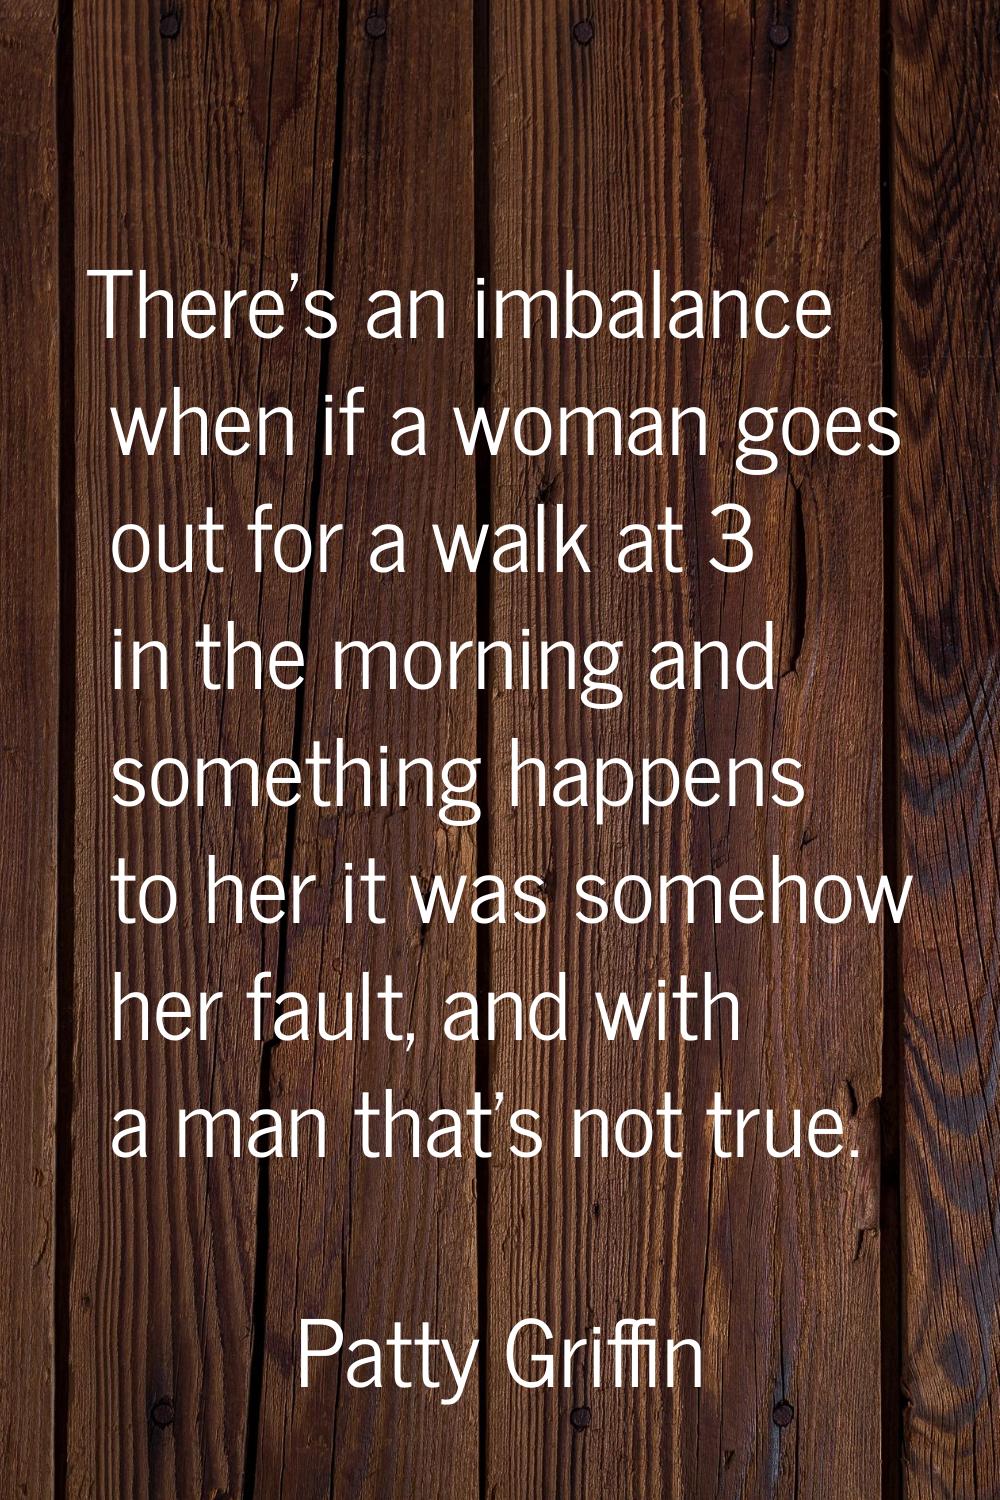 There's an imbalance when if a woman goes out for a walk at 3 in the morning and something happens 